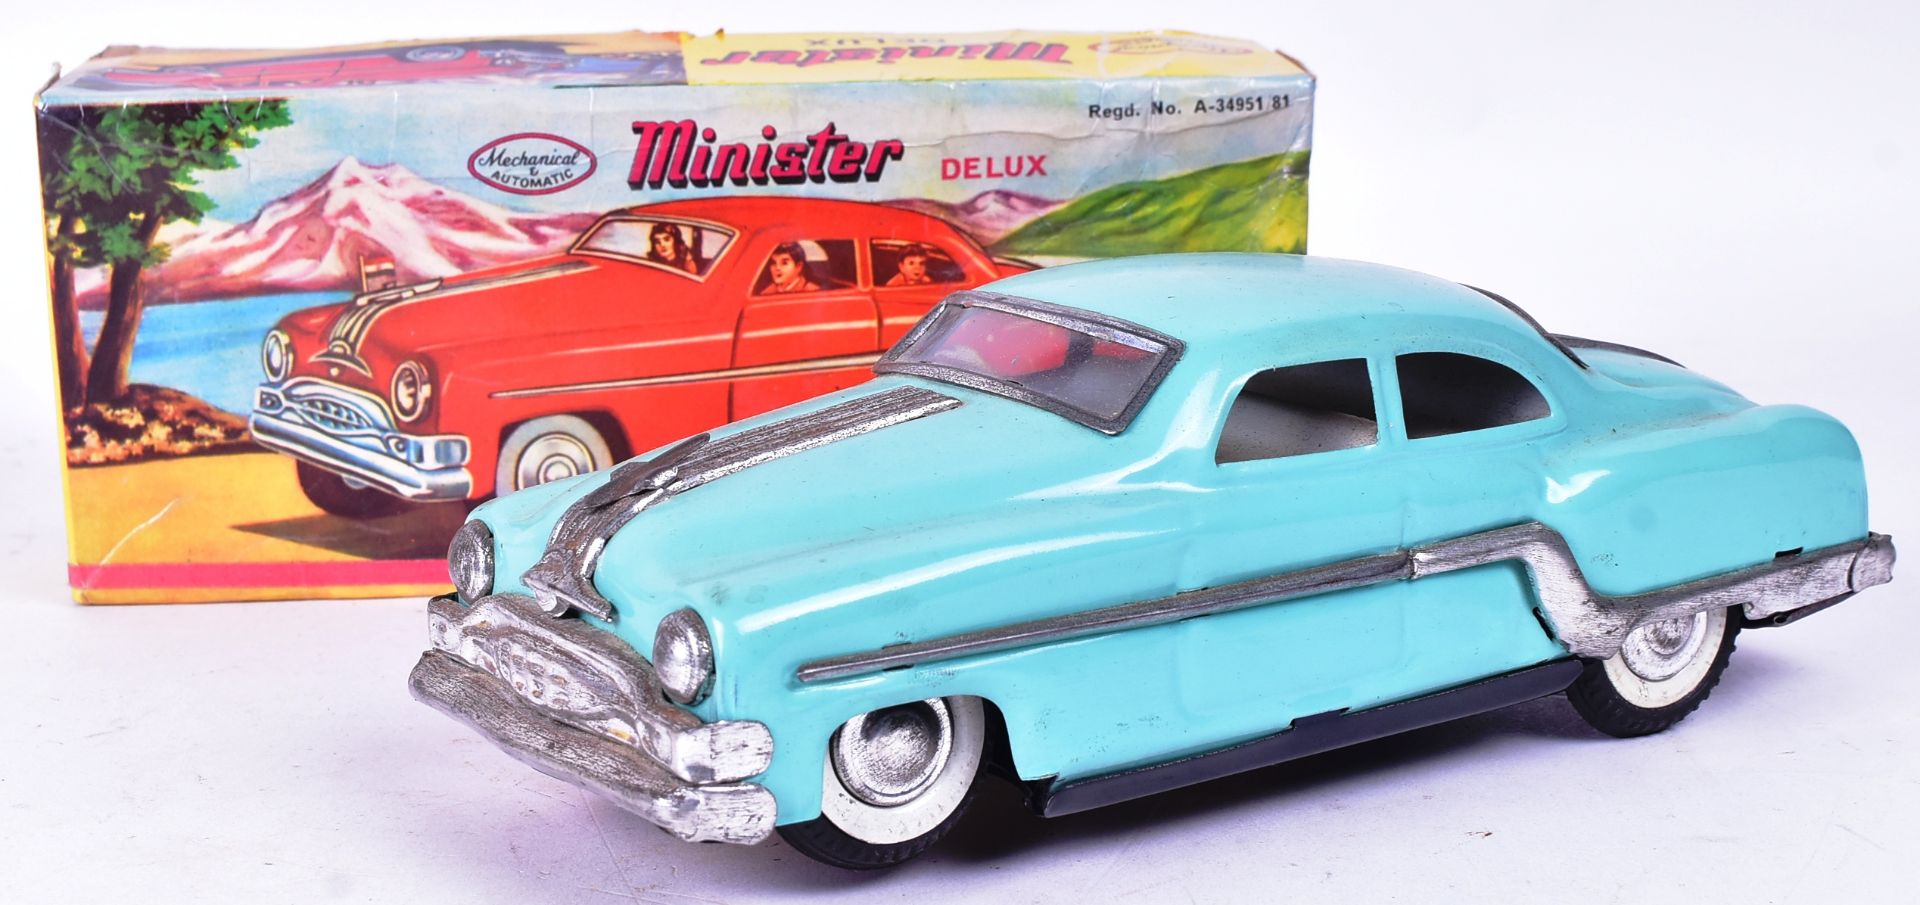 TINPLATE TOYS - X3 VINTAGE MINISTER DELUX TINPLATE TOY CARS - Image 2 of 5